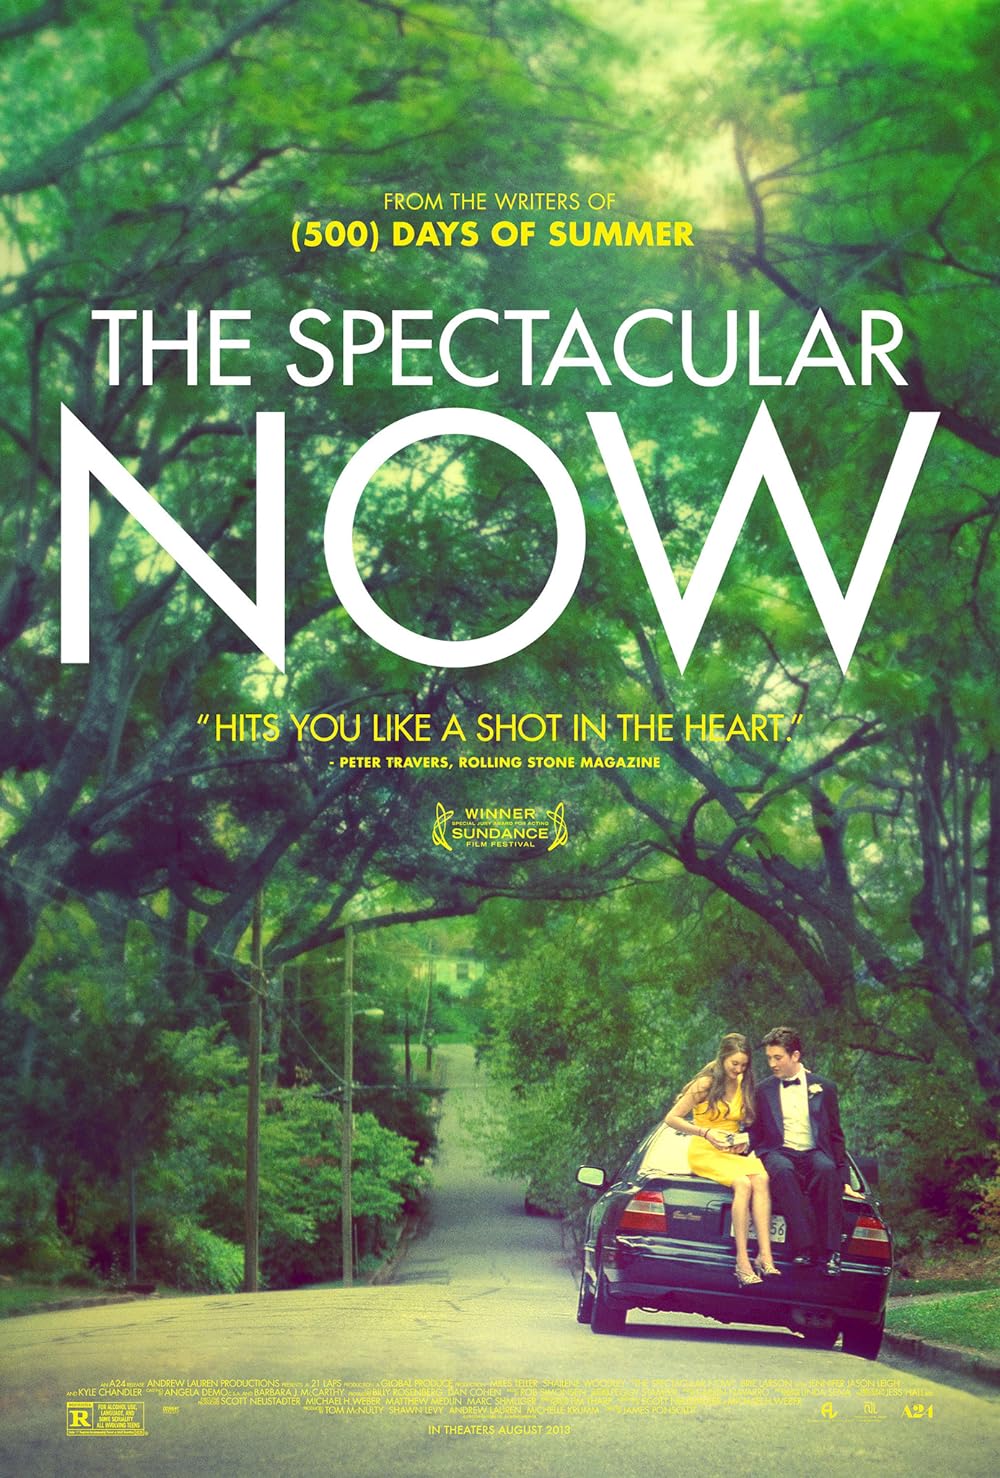 andy huesing recommends spectacular full movie dailymotion pic